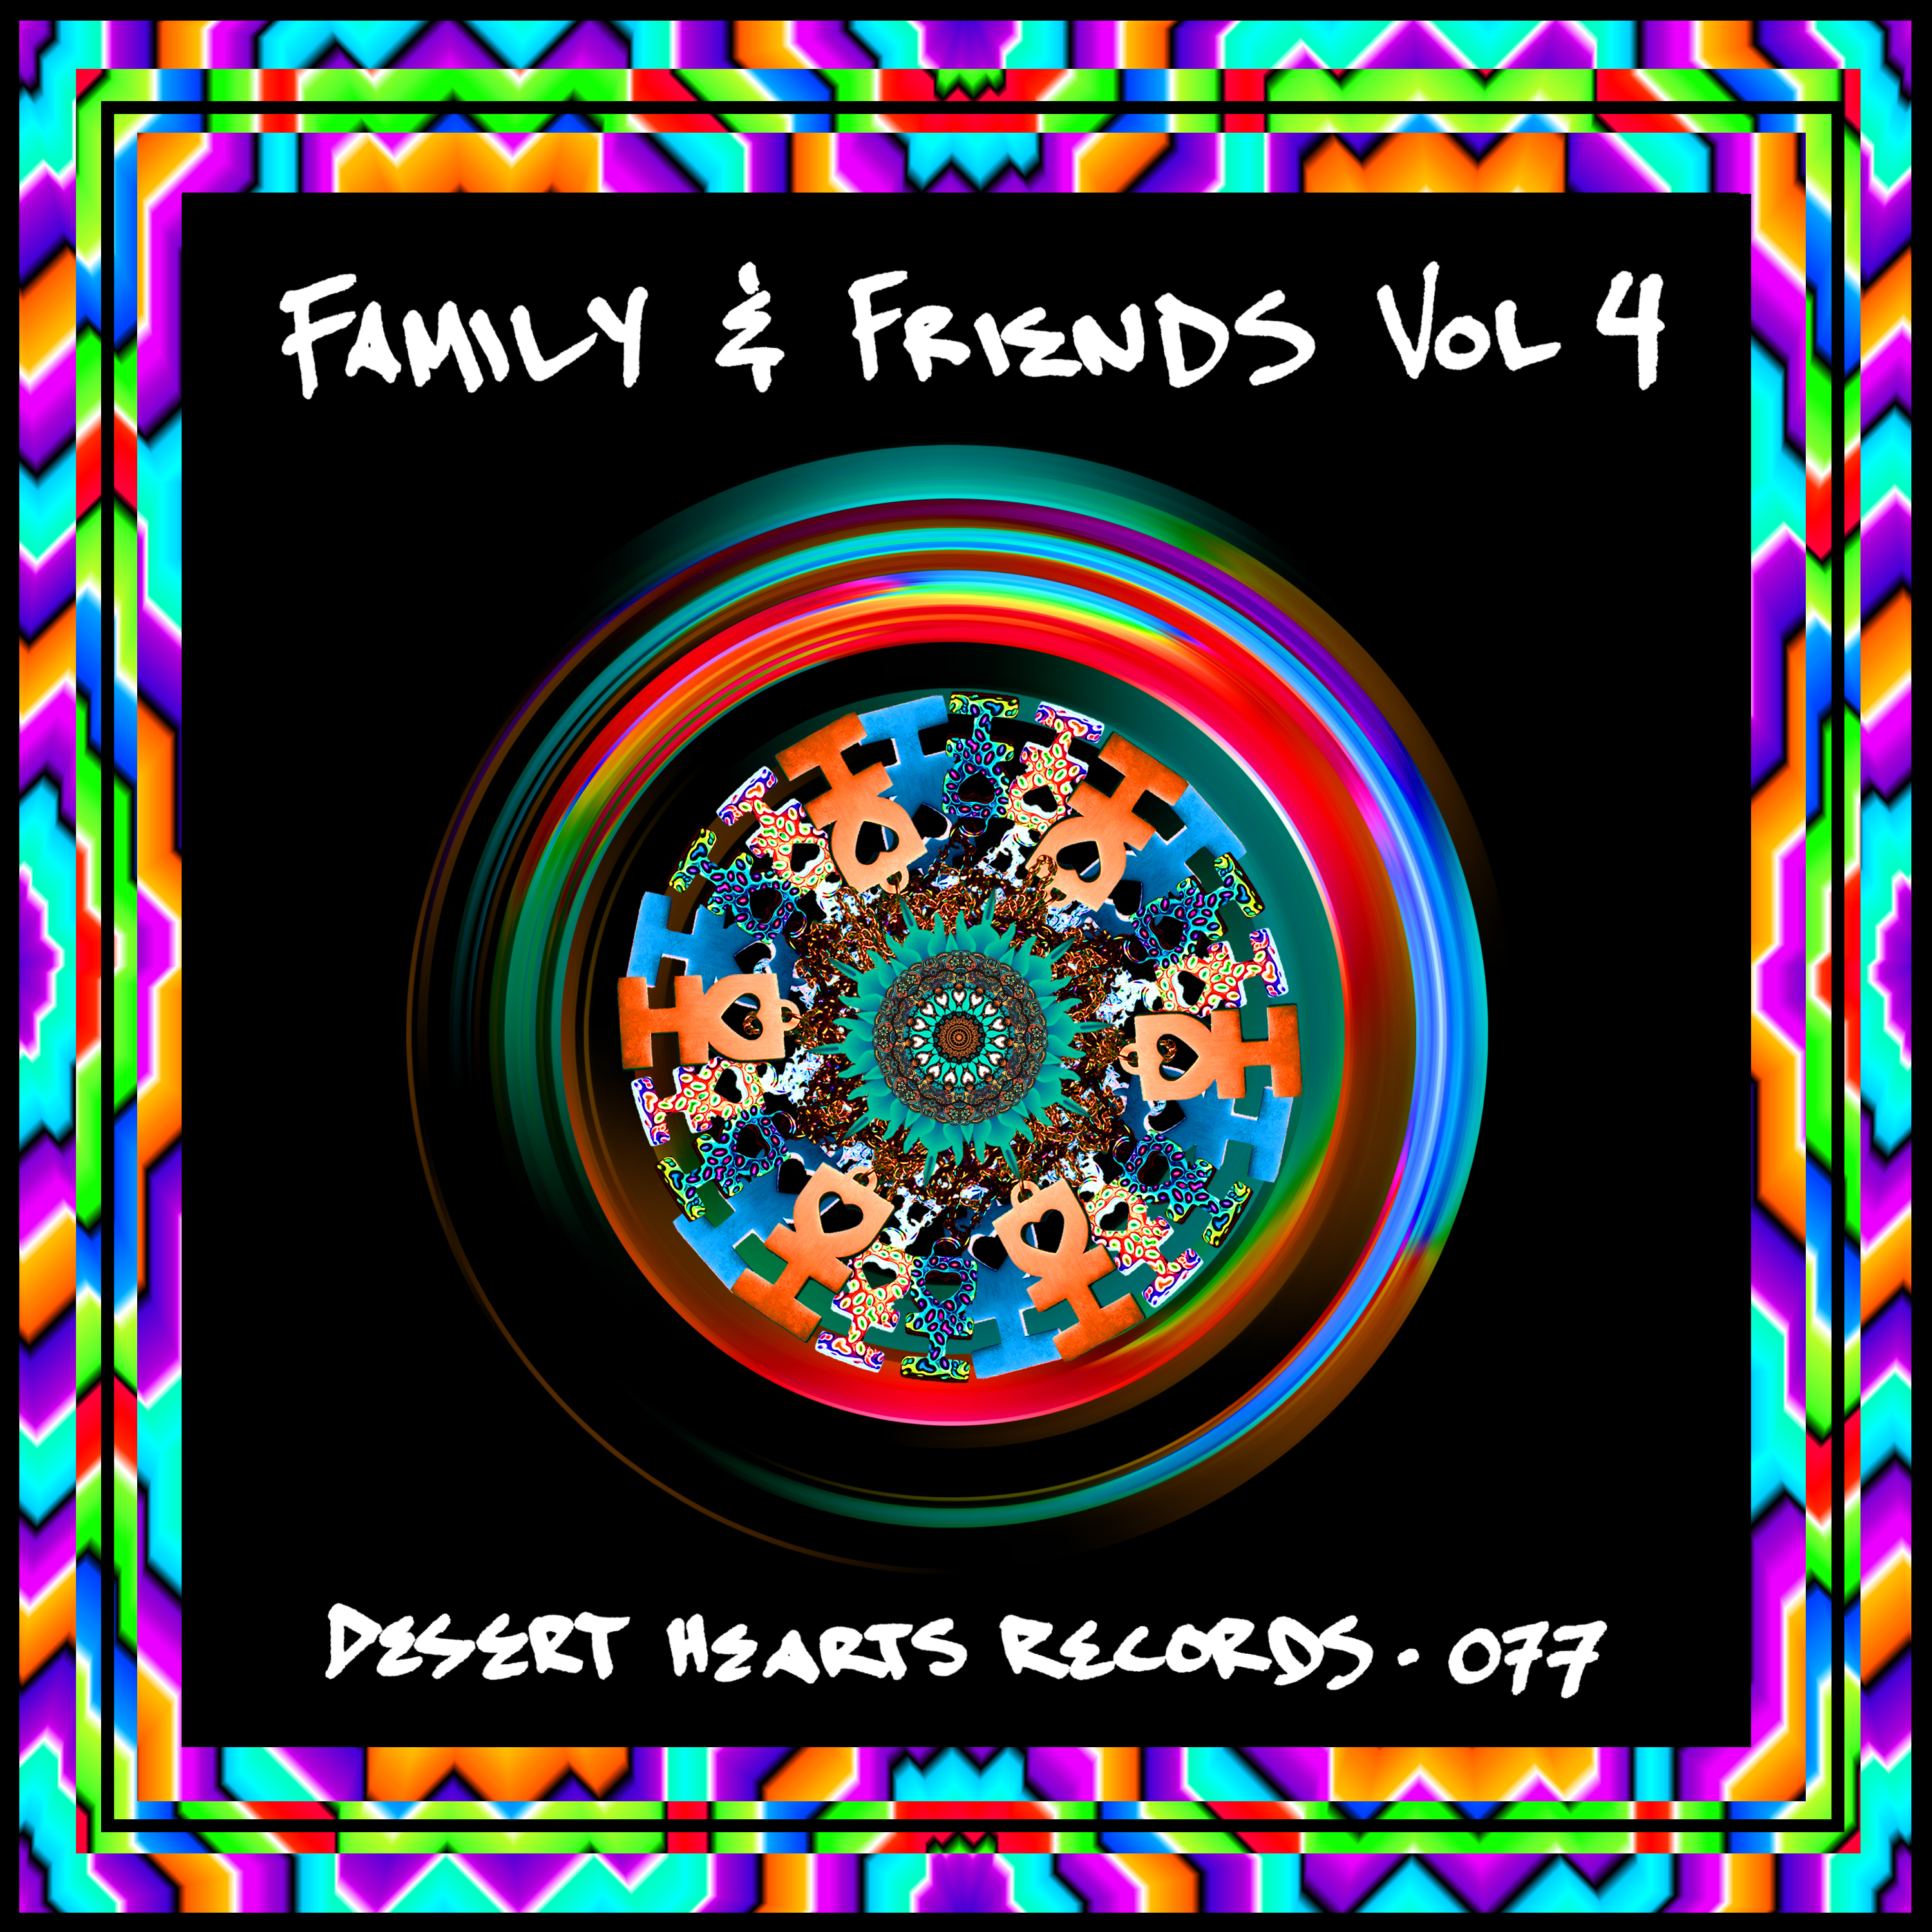 Desert Hearts Returns with new Family & Friends Compilation